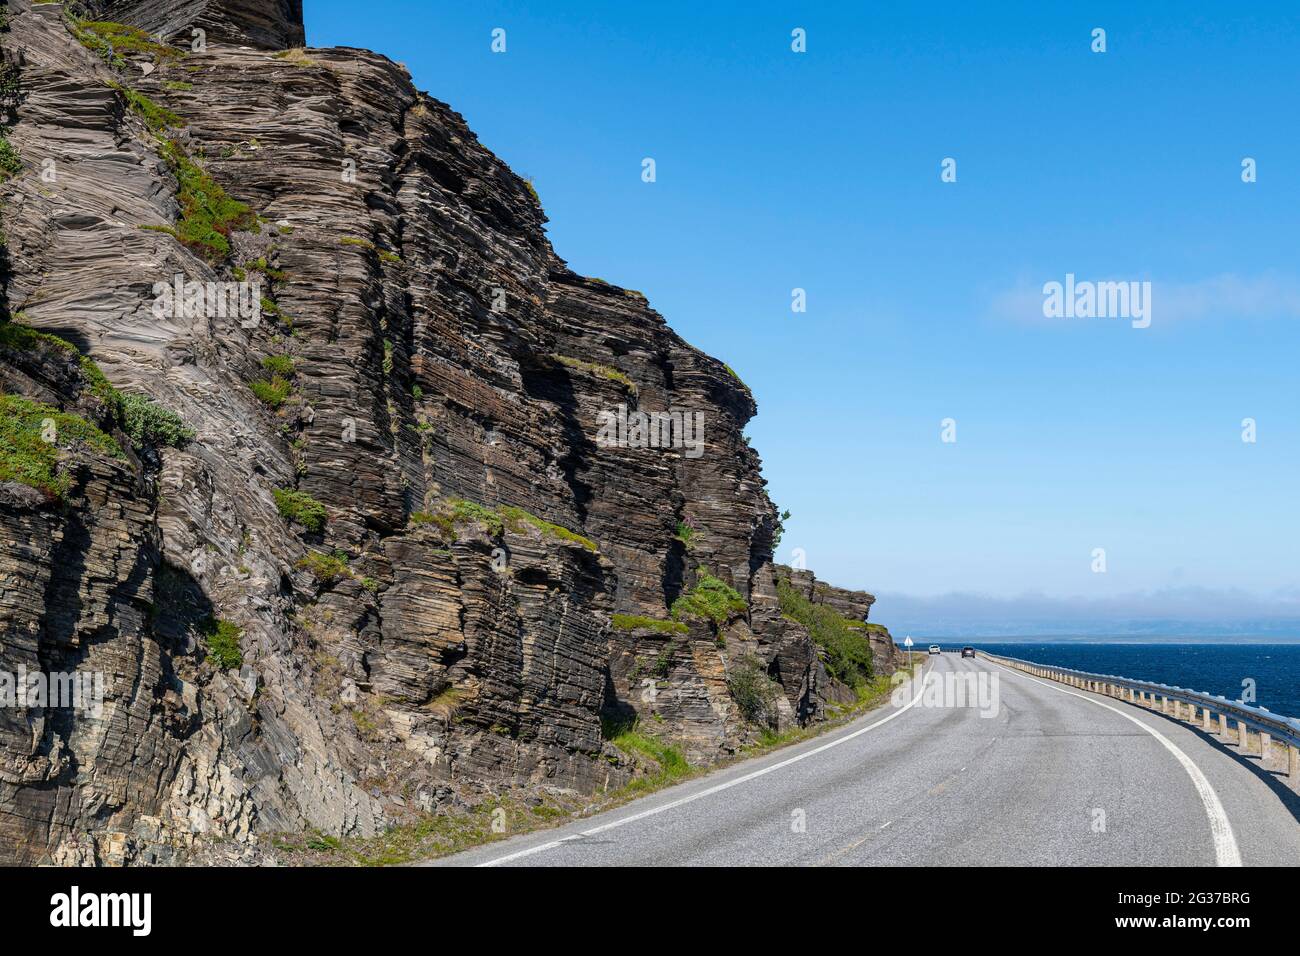 Many rock layers along the road to the Nordkapp, Norway Stock Photo